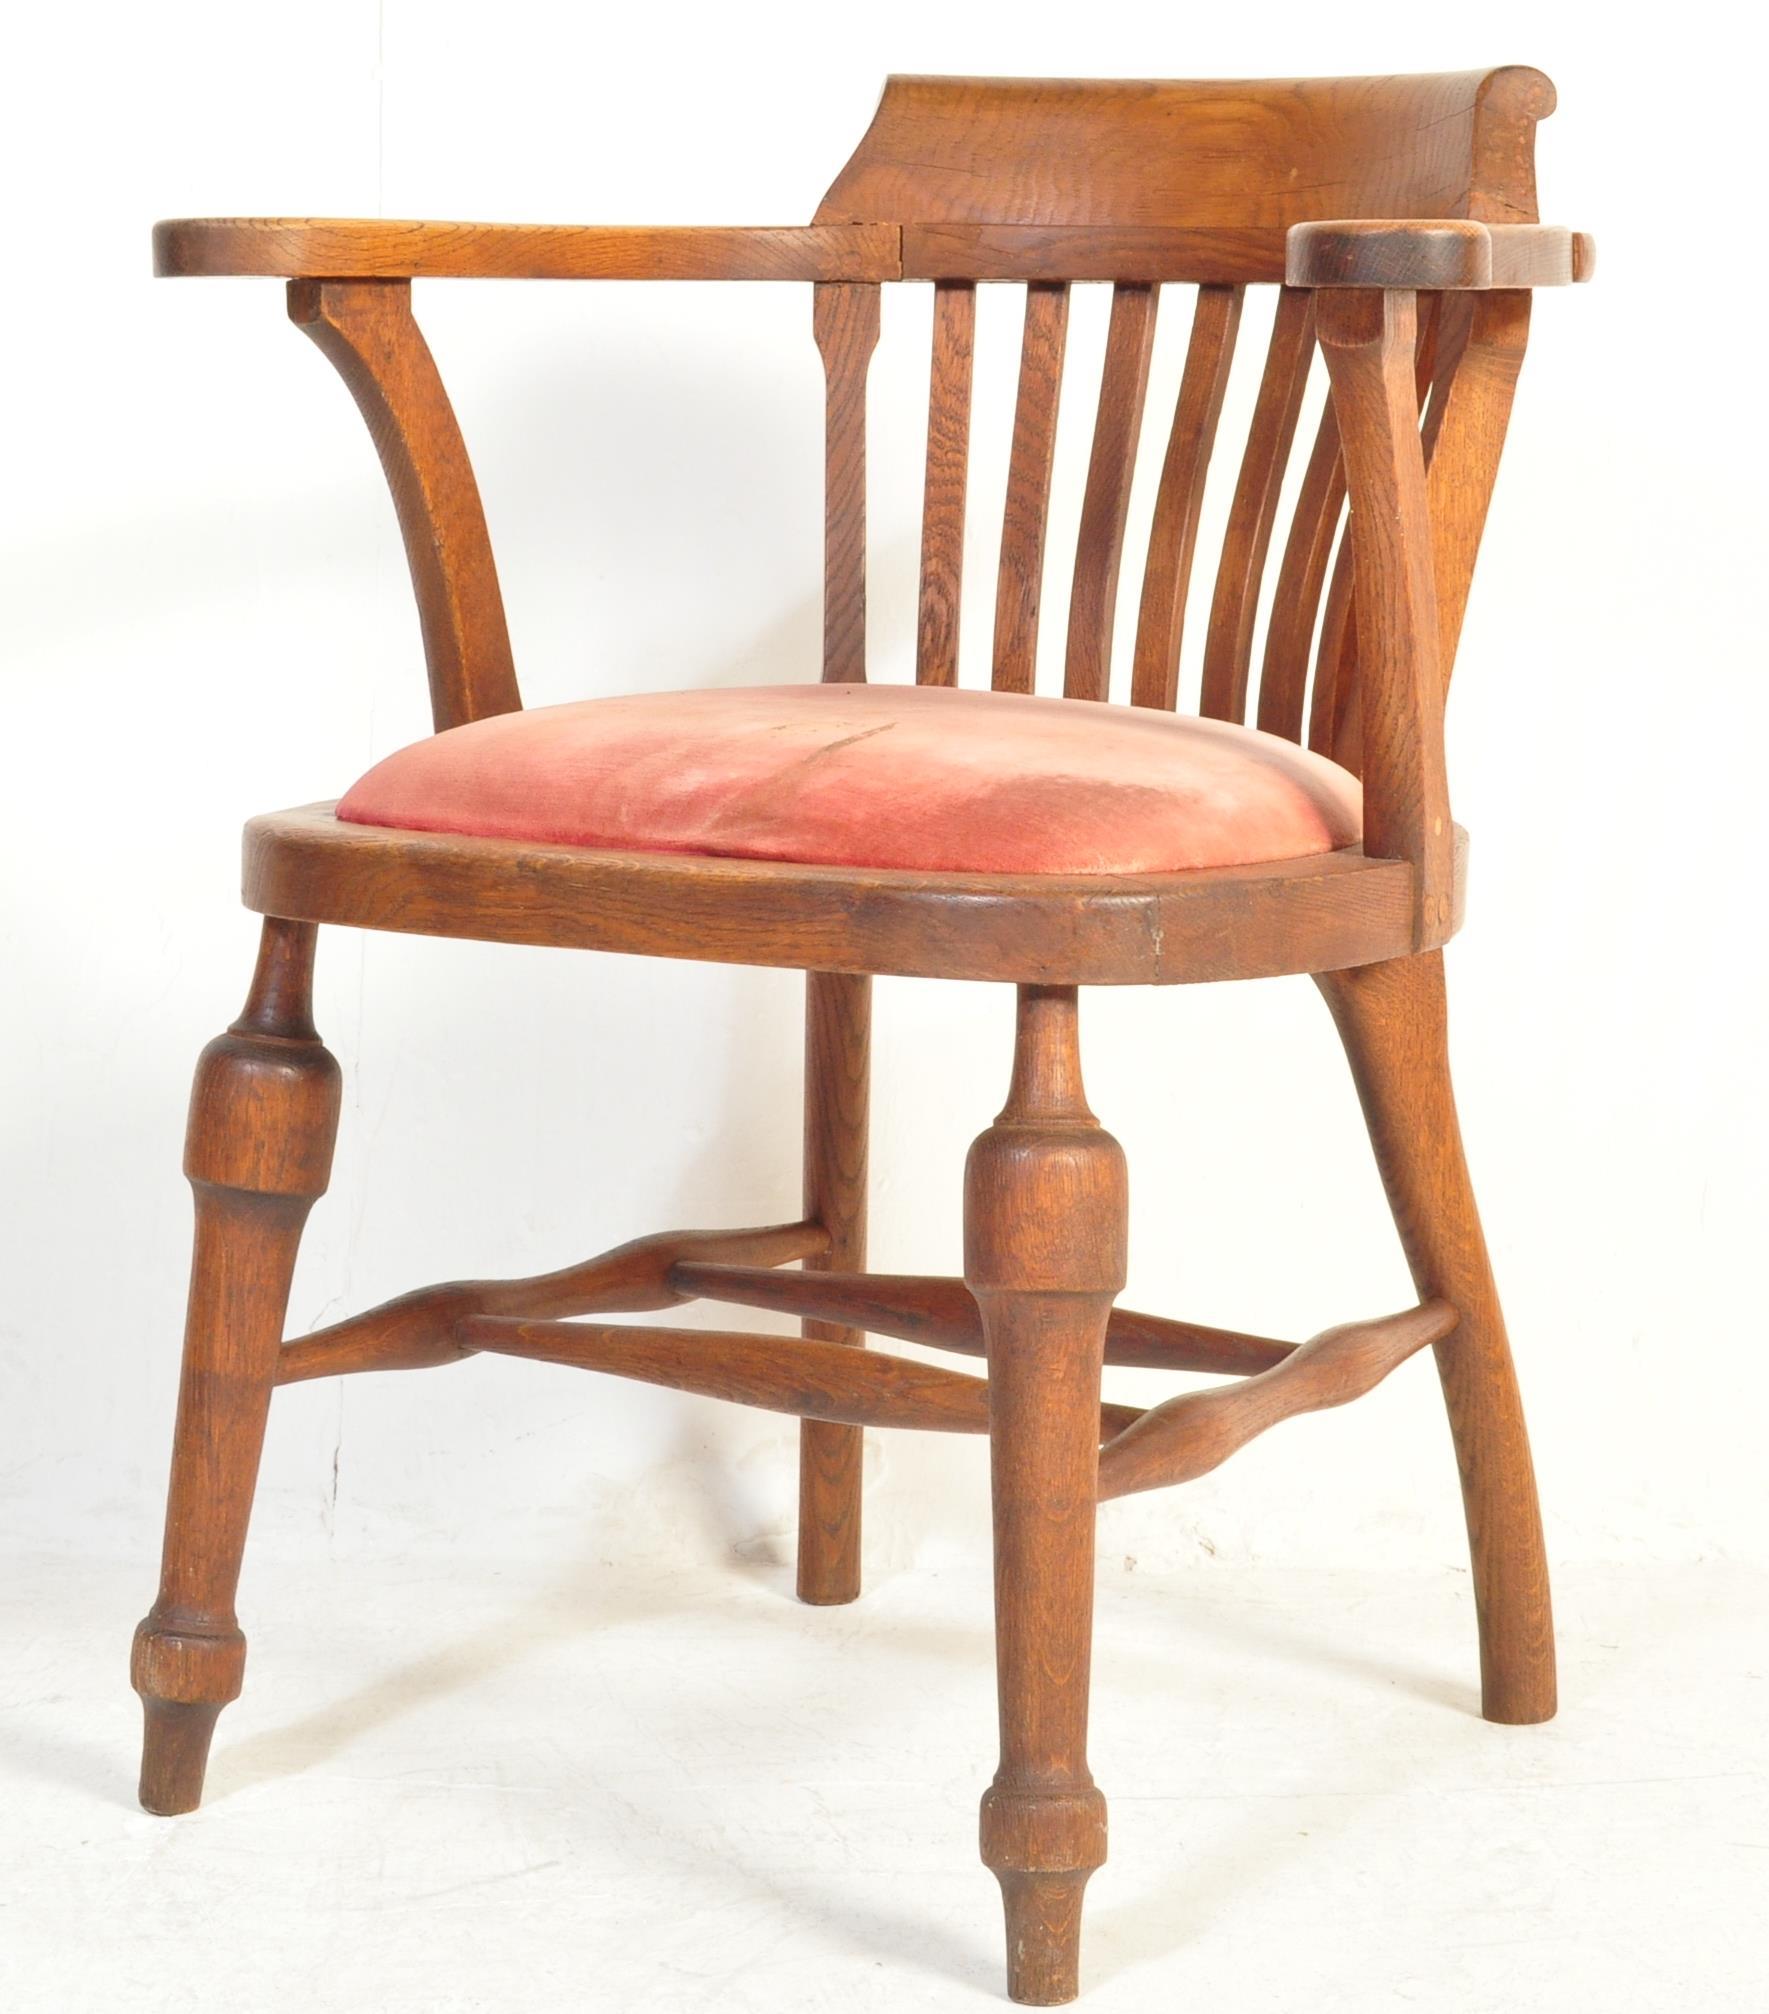 EDWARDIAN MAHOGANY INLAID UPHOLSTERED BEDROOM CHAIR - Image 5 of 5